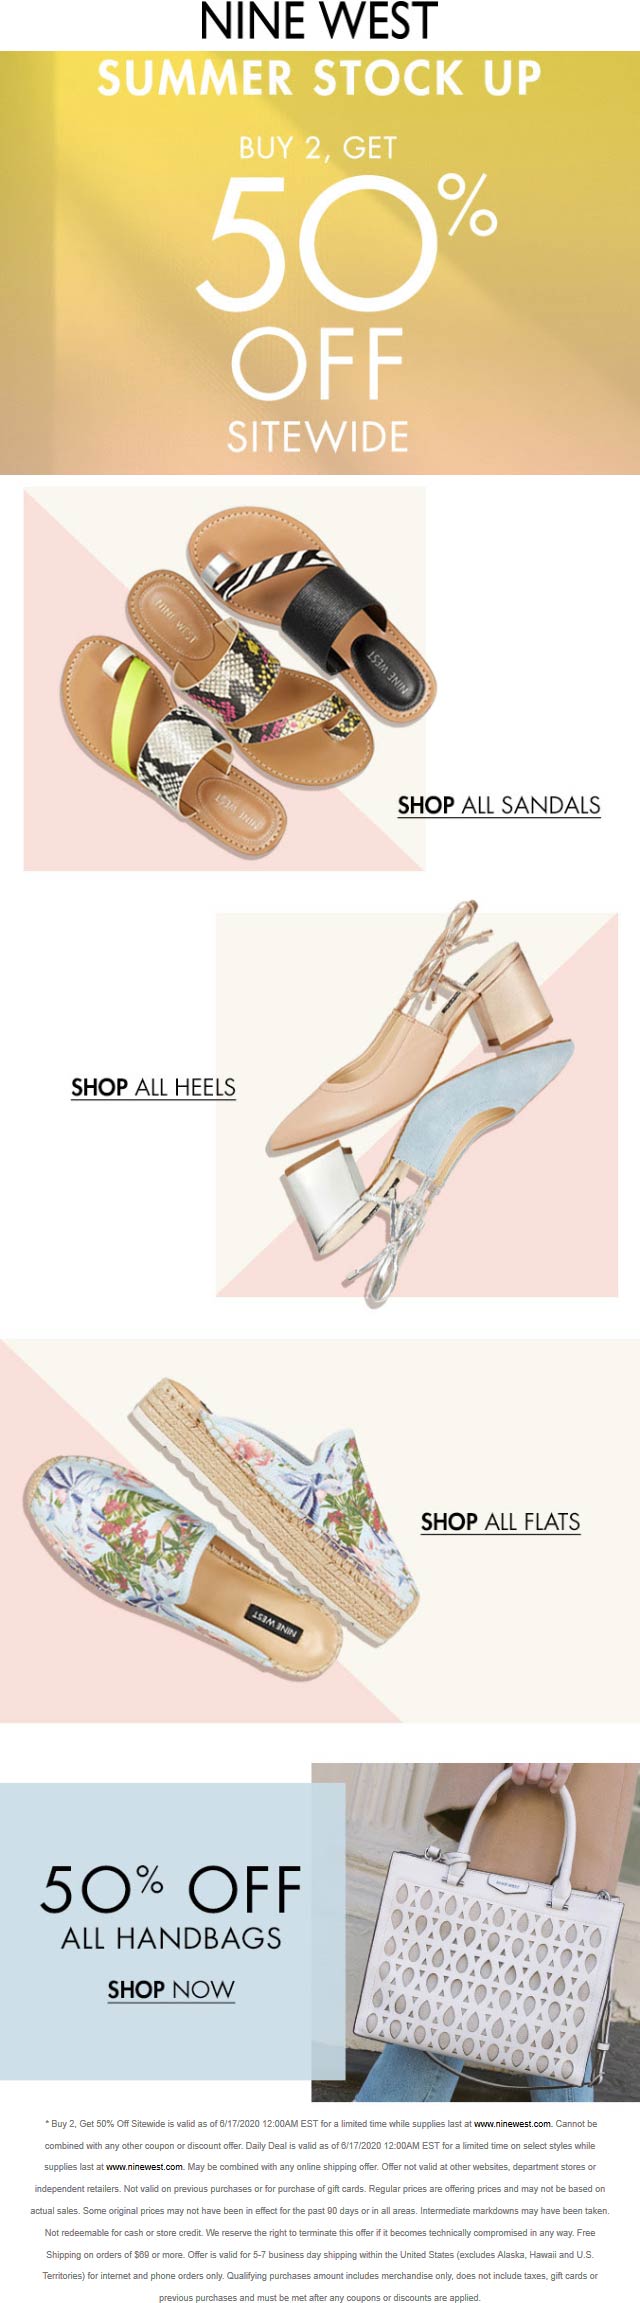 Nine West stores Coupon  50% off 2+ items everything online at Nine West #ninewest